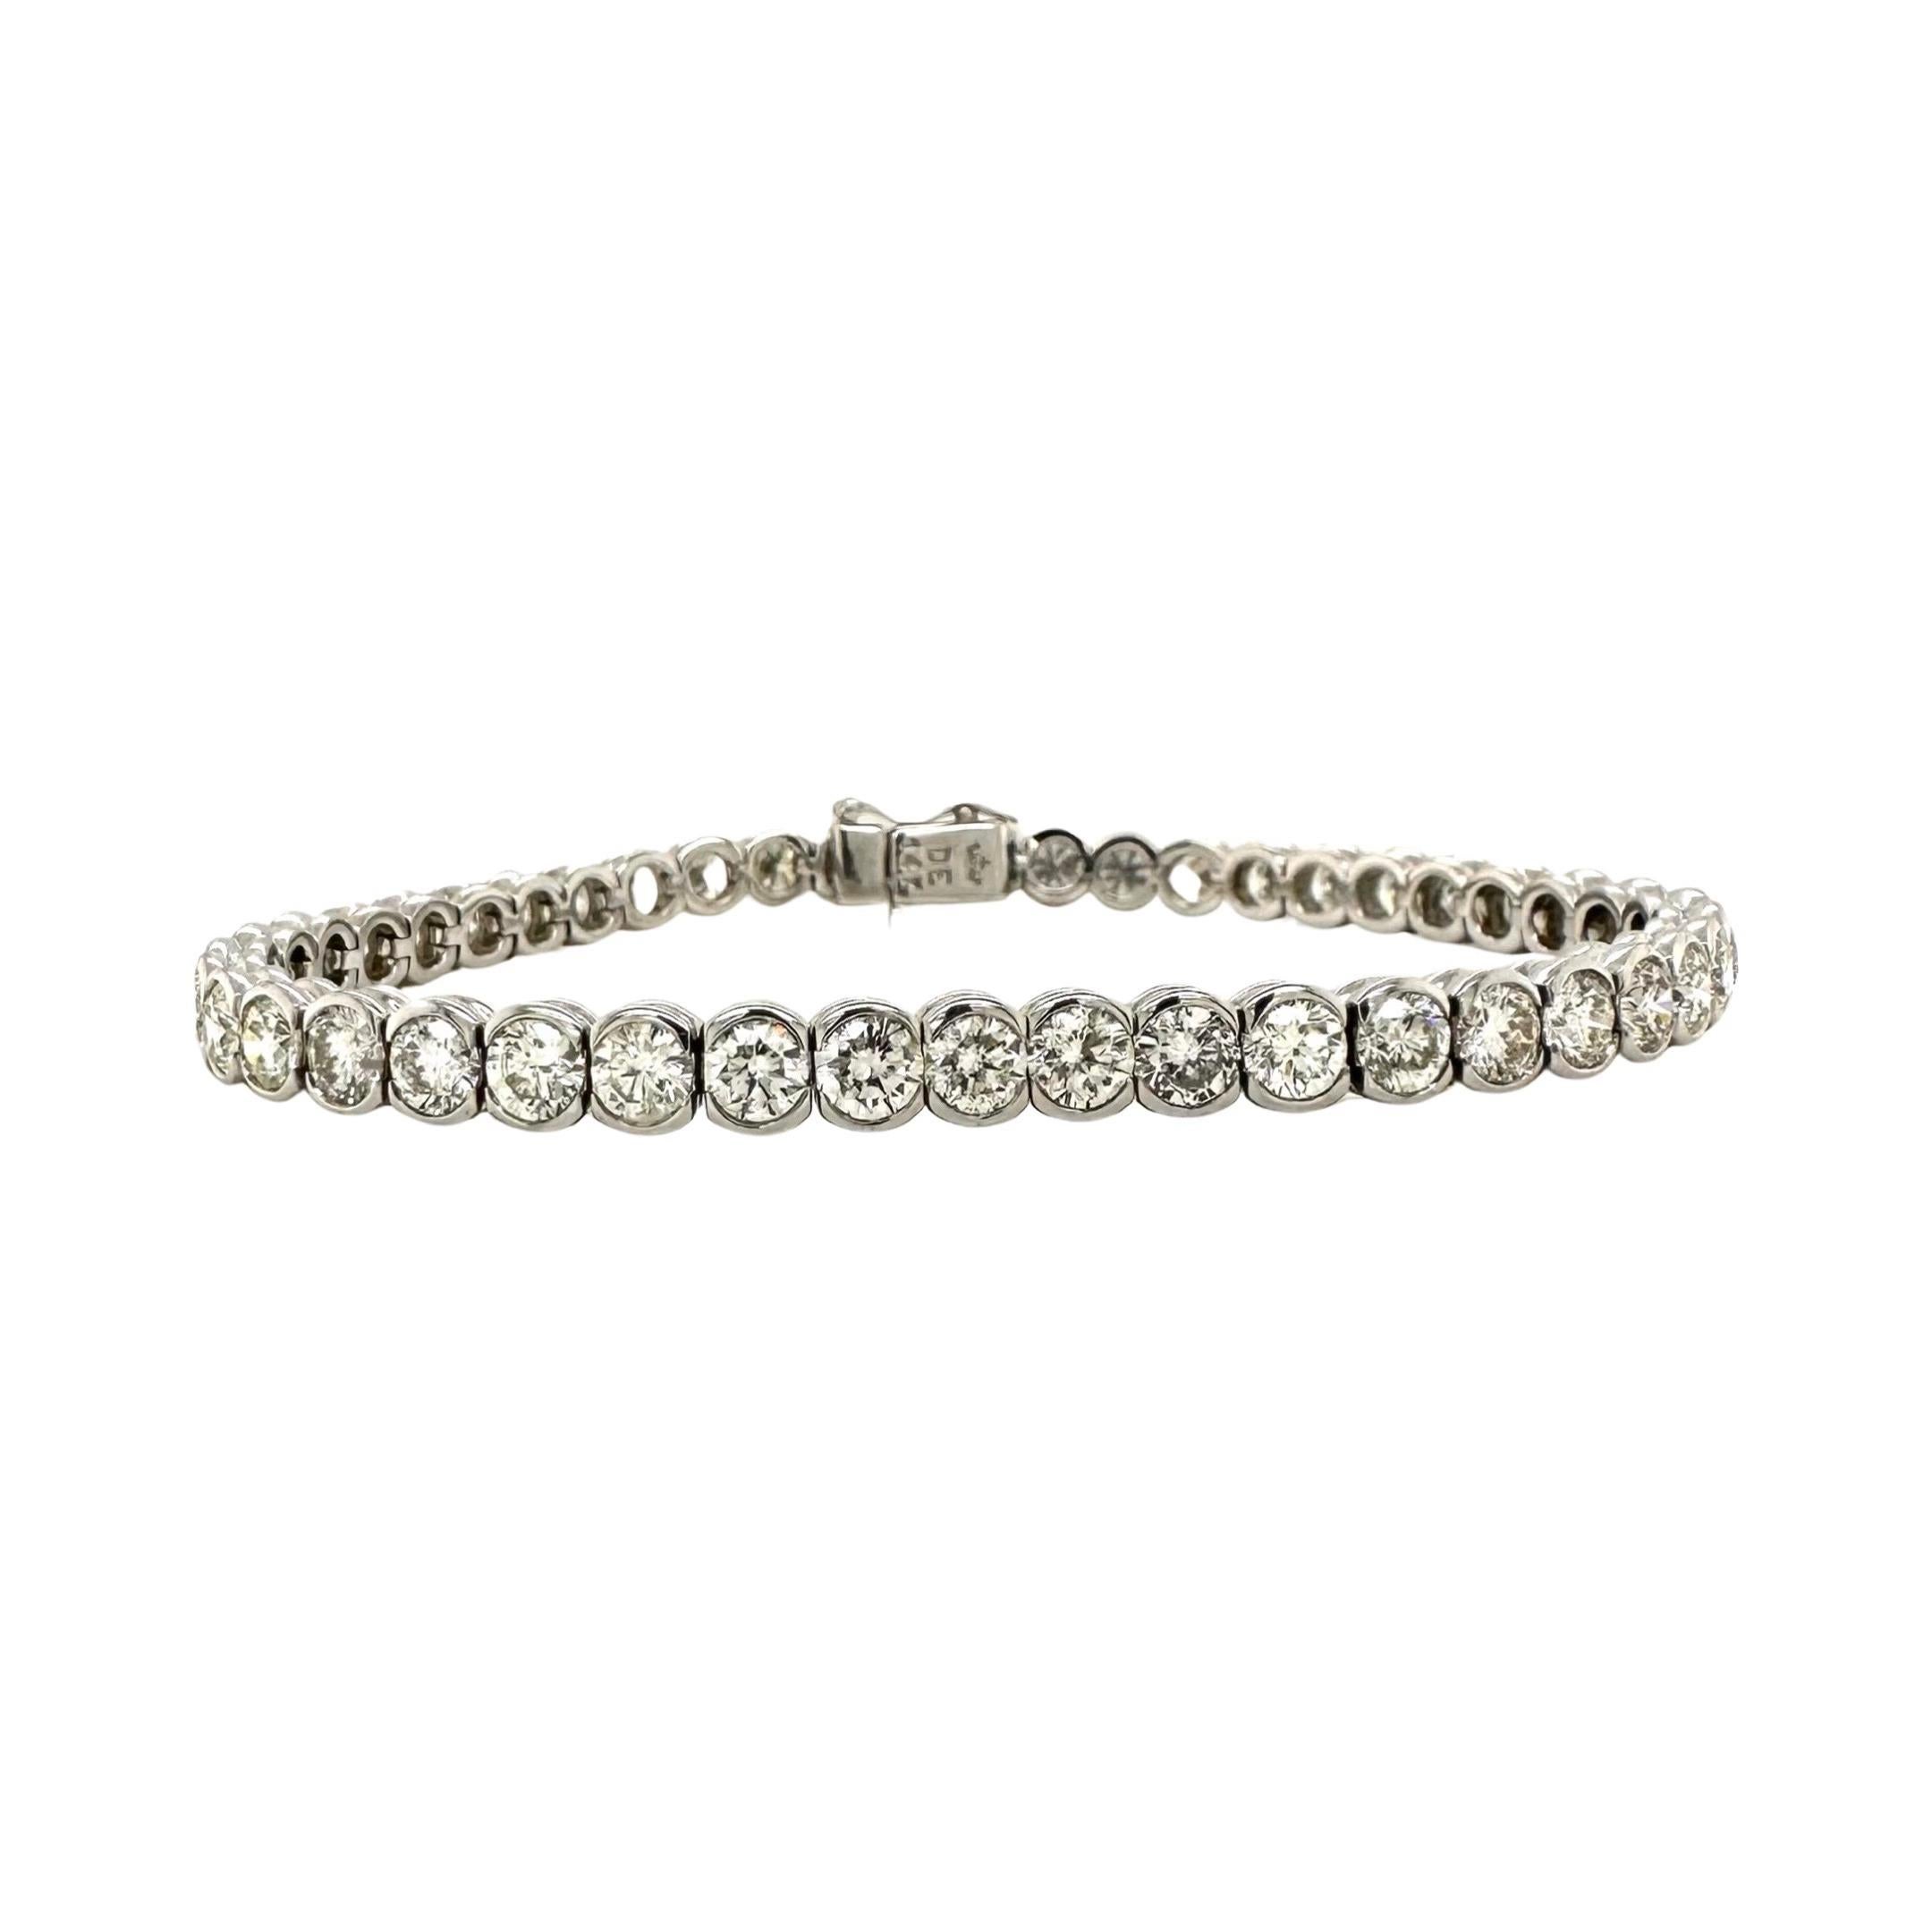 Material	
White Gold
Metal Purity	
18k
Carat Weight	
11.25 ct
Diamond Color	
I-J
Diamond Clarity	
VS1-VS2
Size	
7 inches

The Gorgeous Bezel Set diamond Tennis Bracelet in 18k White Gold is a show stopping piece. The popular setting emerged around